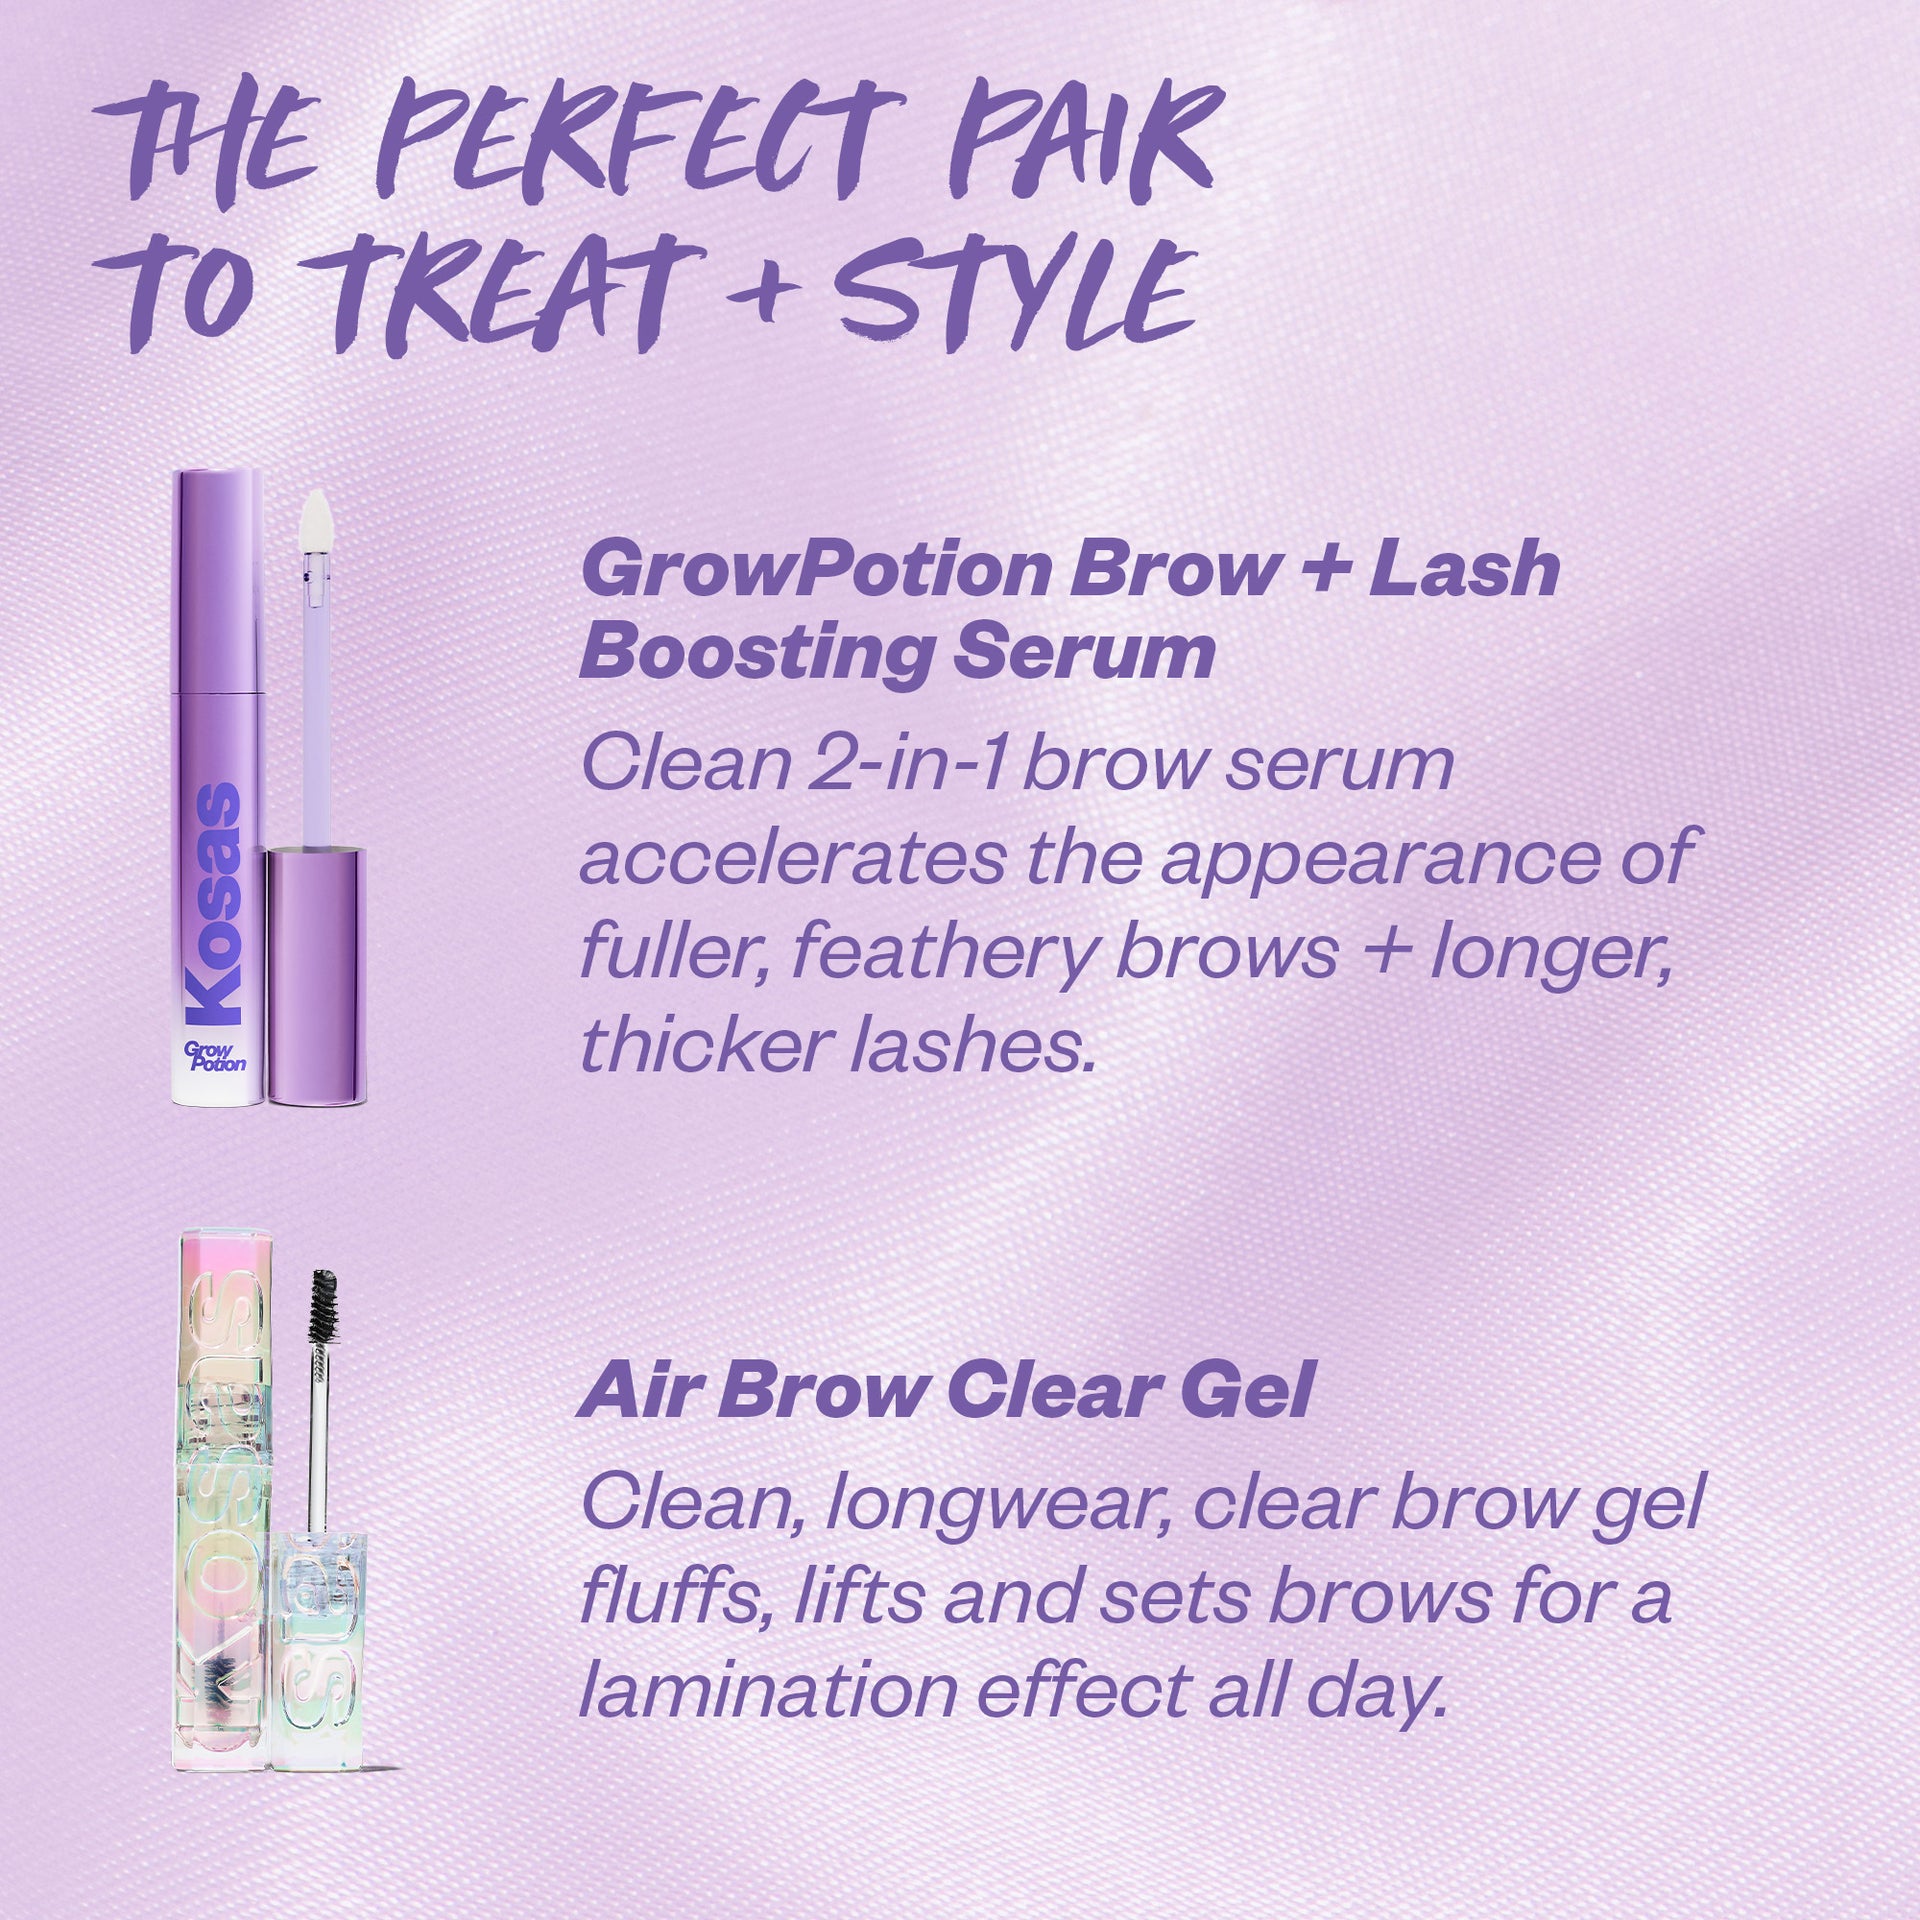 Image of the perfect duo for treating and styling brows: GrowPotion + Lash Boosting Serum paired with Air Brow Clear Gel.